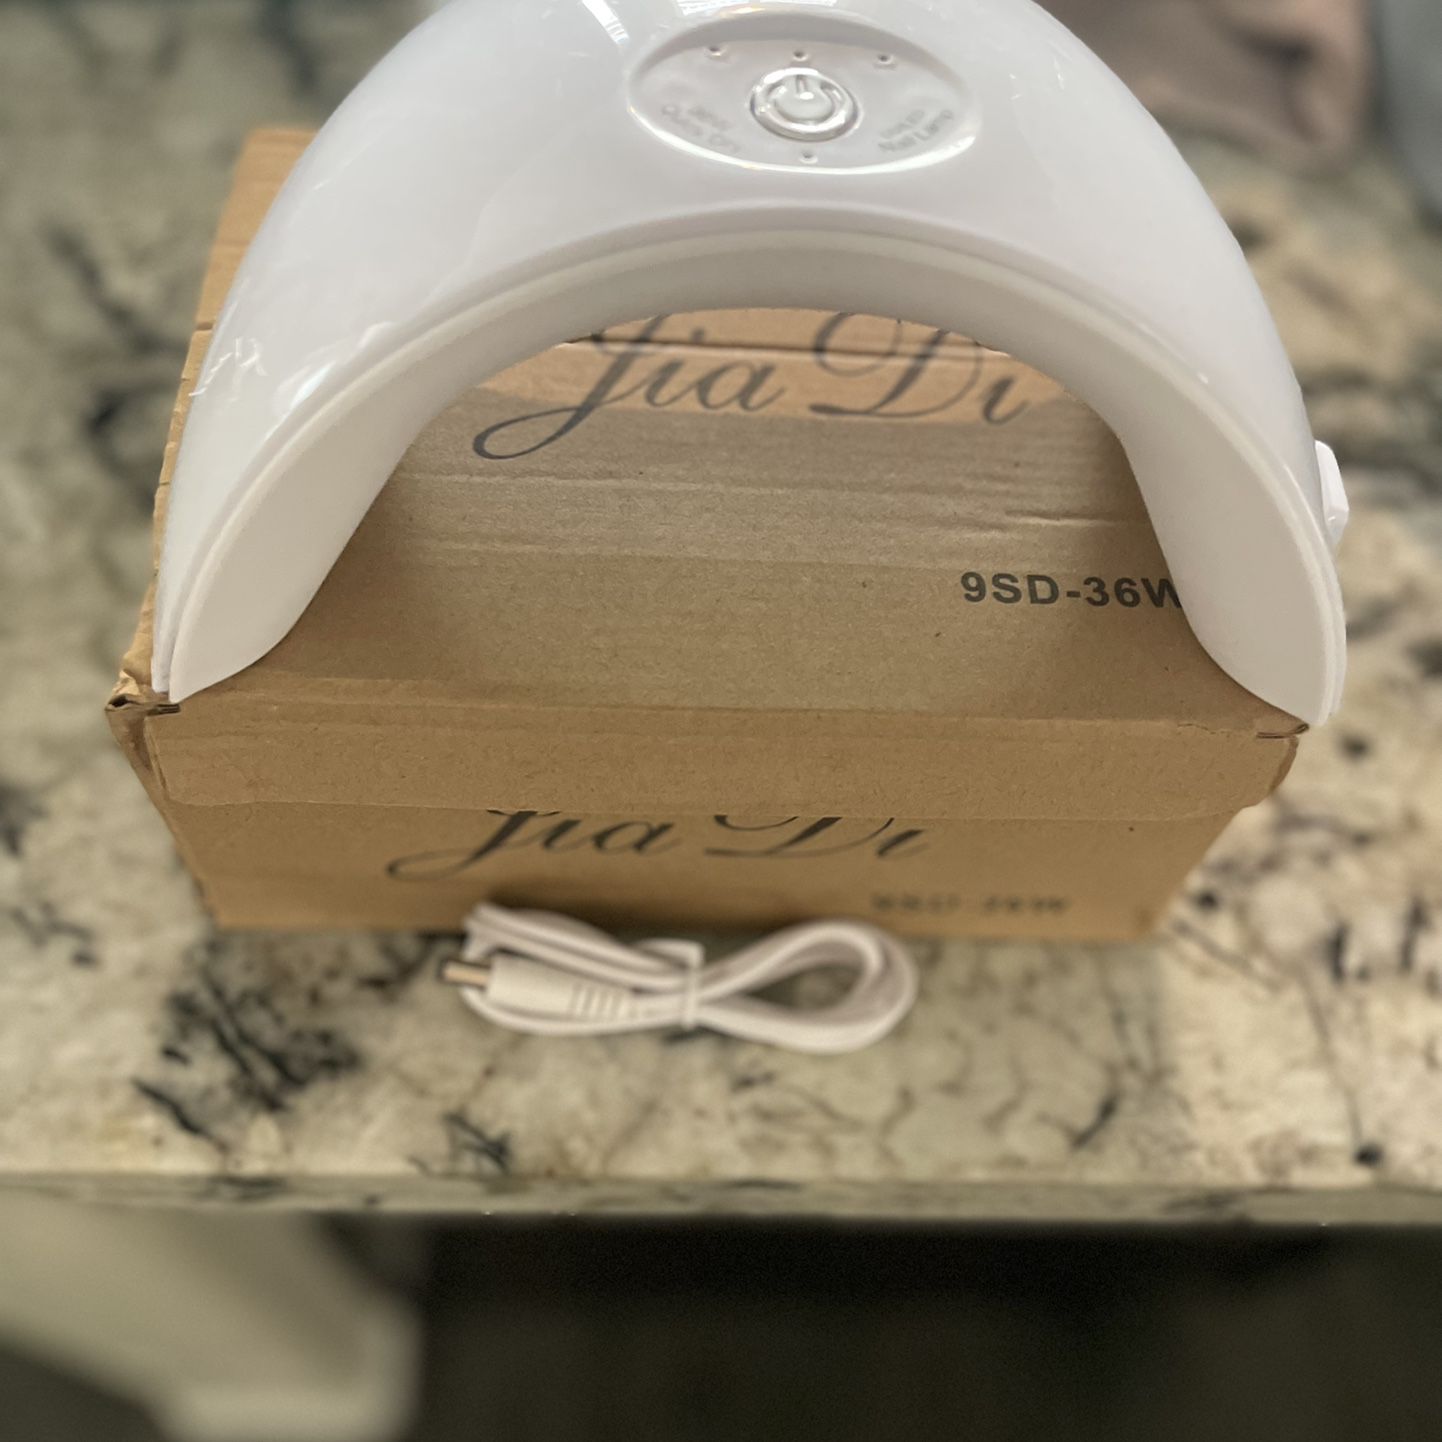 UV LED nail Lamp for Sale in Las Vegas, NV - OfferUp